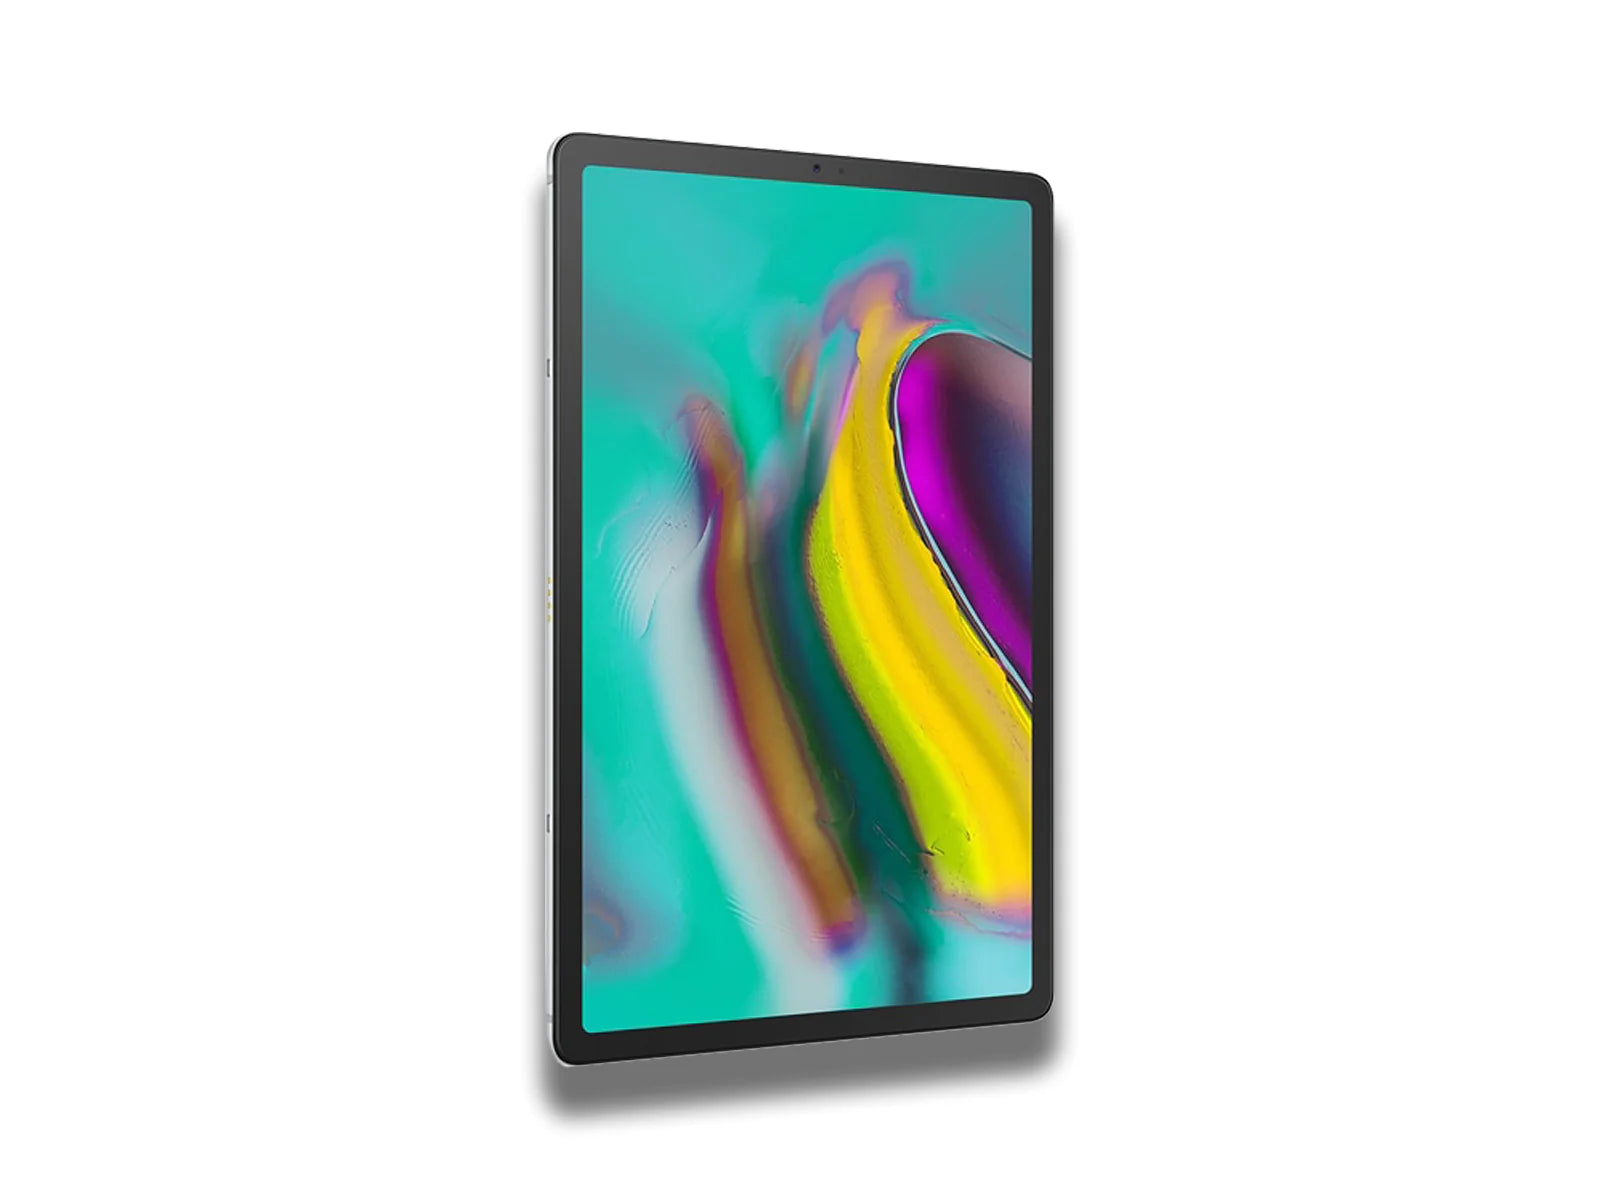 Image-showing-front-view-of-the-samsung-galaxy-tab-s5e-lte-on-the-white-background